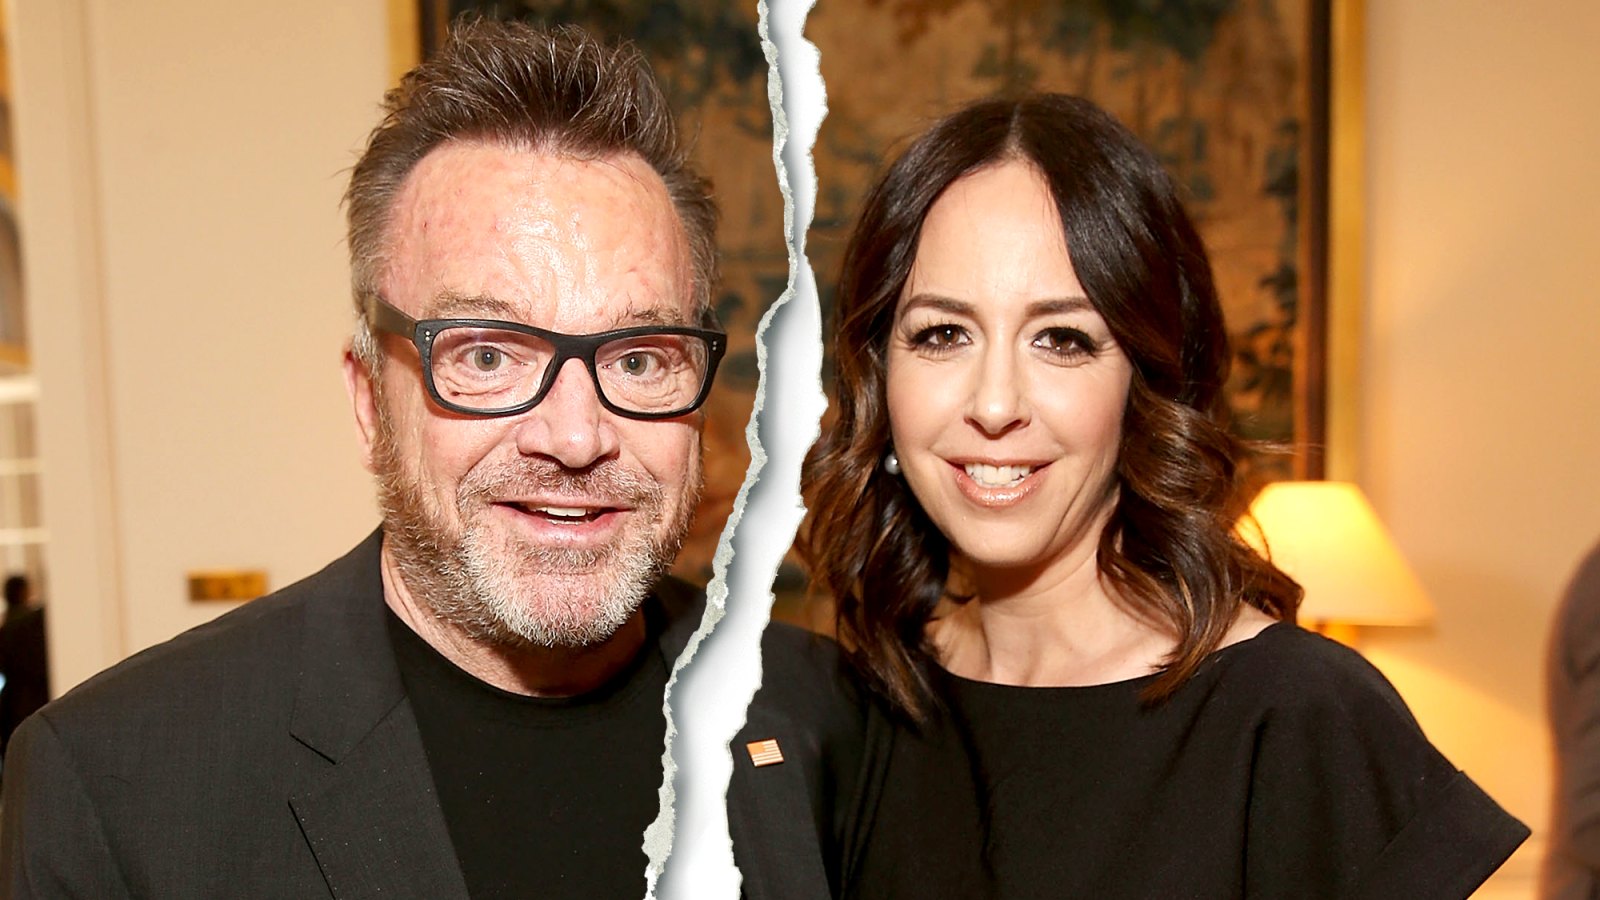 Tom-Arnold-Confirms-Split-From-Wife-Ashley-Groussman